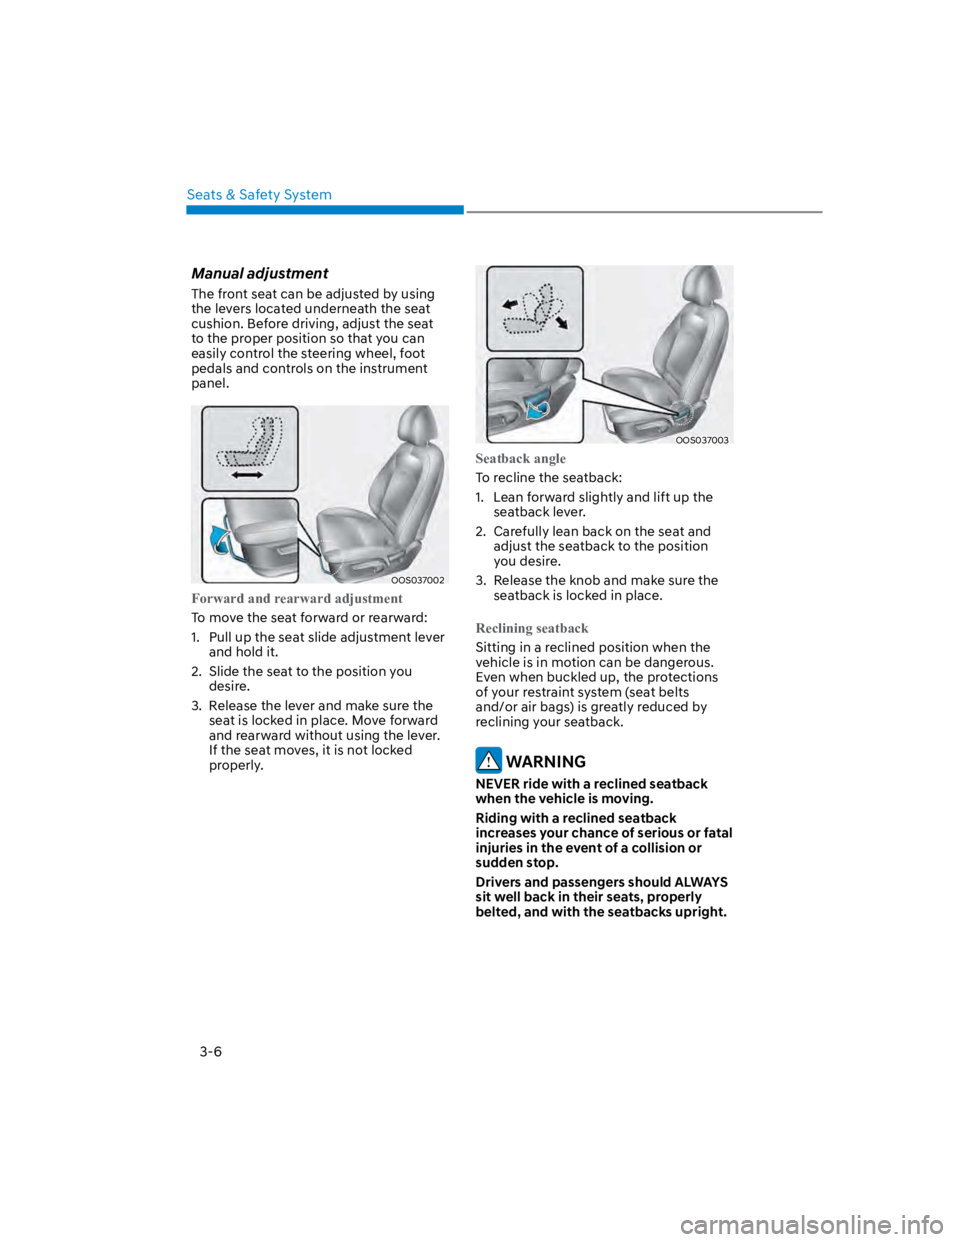 HYUNDAI KONA 2022  Owners Manual Seats & Safety System
3-6
Manual adjustment
The front seat can be adjusted by using 
the levers located underneath the seat 
cushion. Before driving, adjust the seat 
to the proper position so that yo